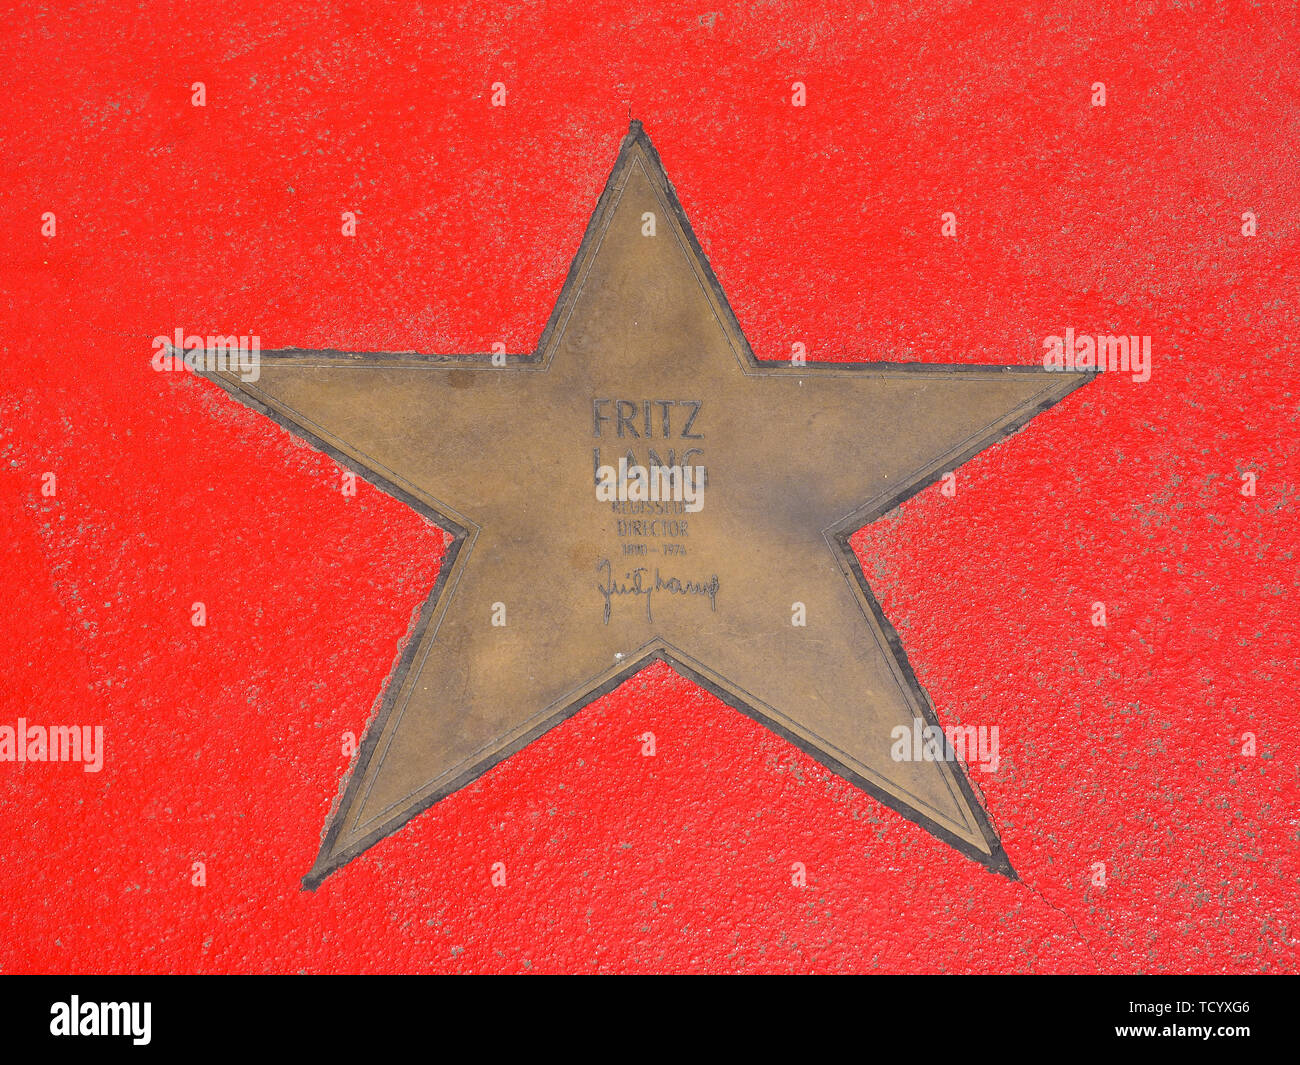 BERLIN, GERMANY - CIRCA JUNE 2019: Fritz Lang star on the Boulevard der Stars (the Walk of Fame) Stock Photo